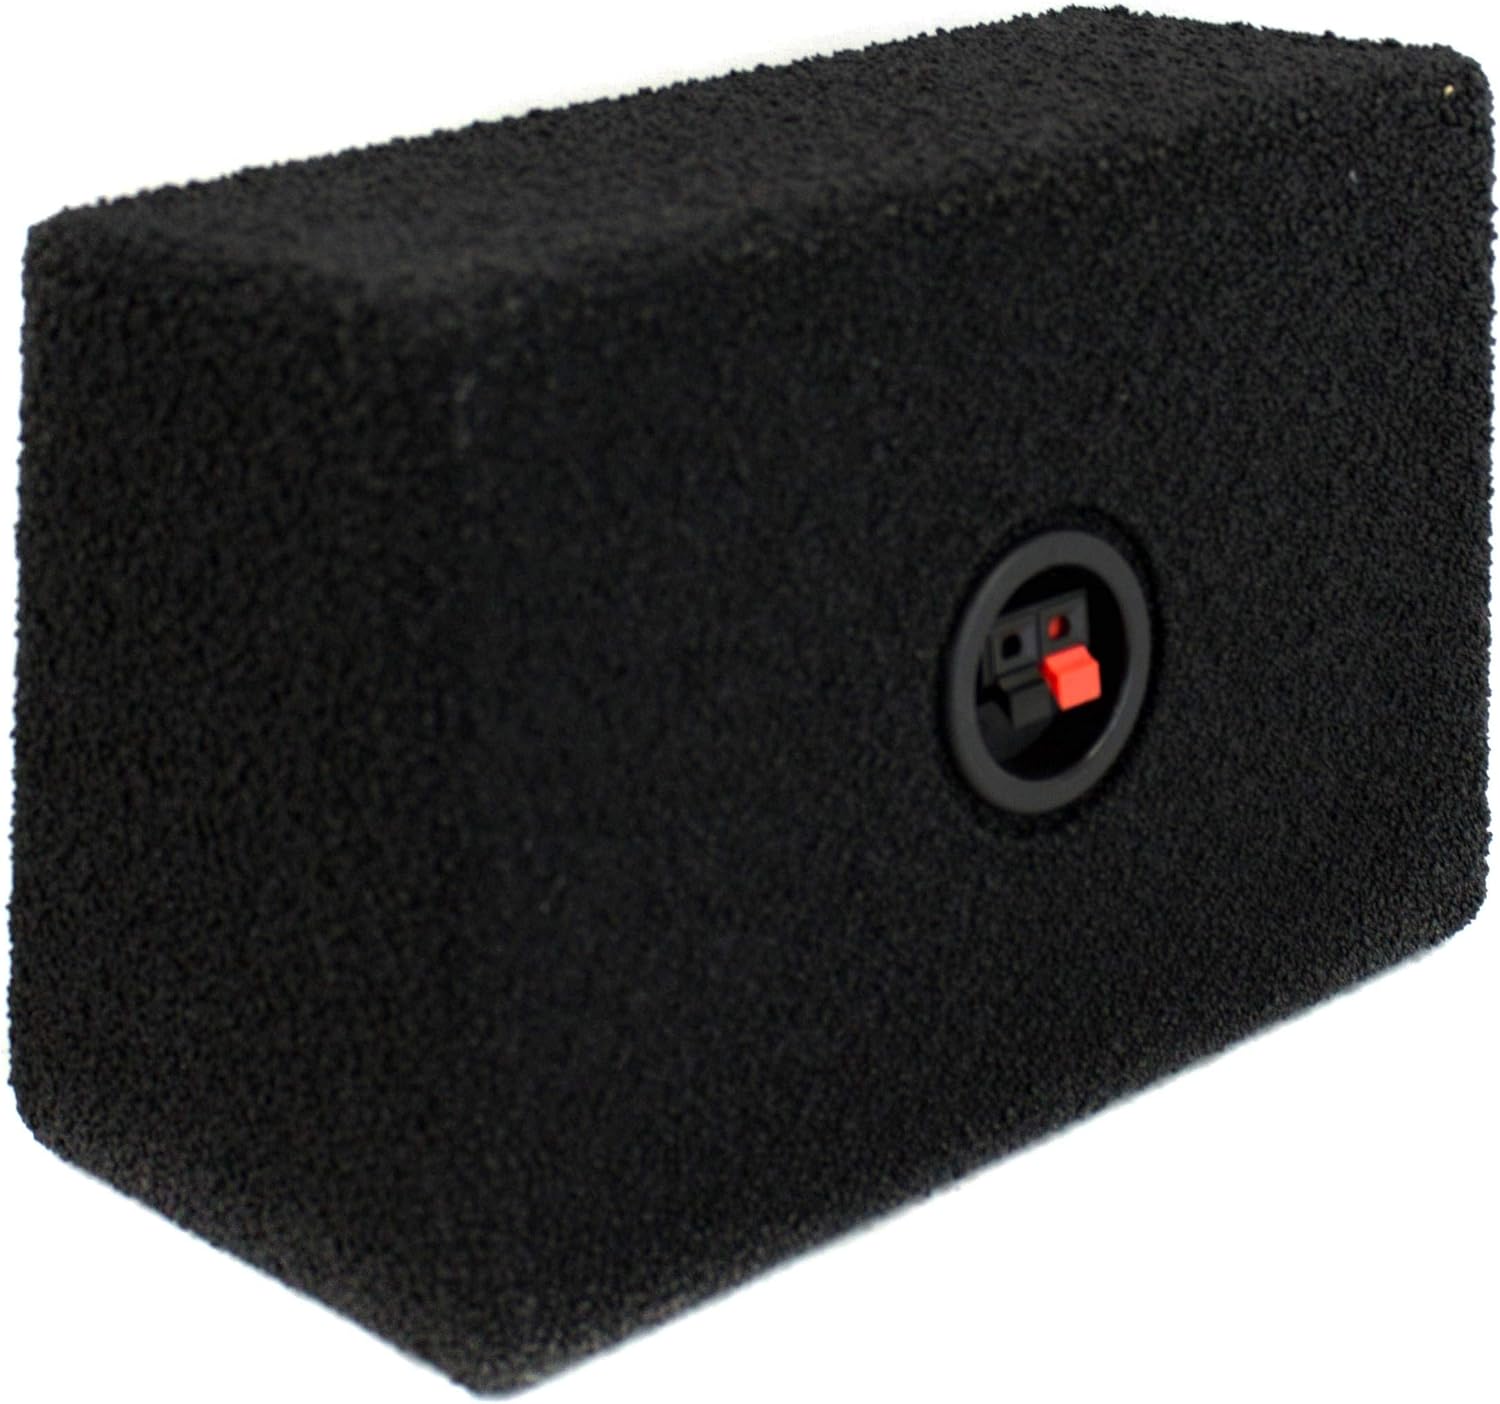 Q Power 6 by 9 Inches Speaker Box Audio Enclosure with Durable Black Bed Rhino Liner Spray Finish with Terminal Cup Connectors (2 Pack)